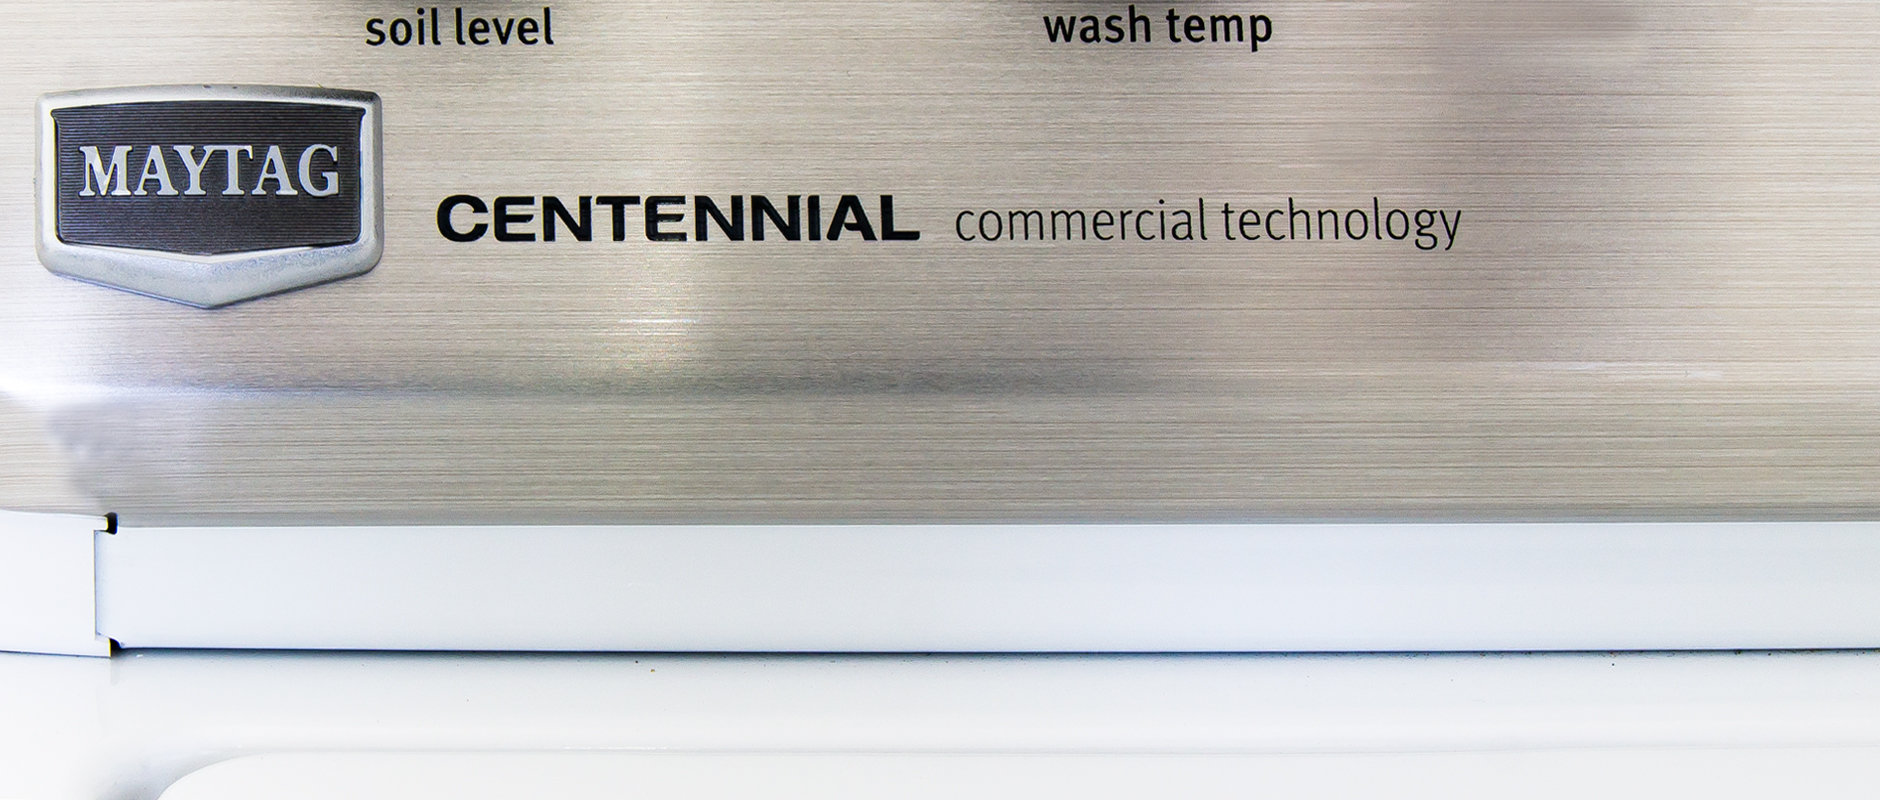 Are Maytag washing machines more energy efficient than other brands?